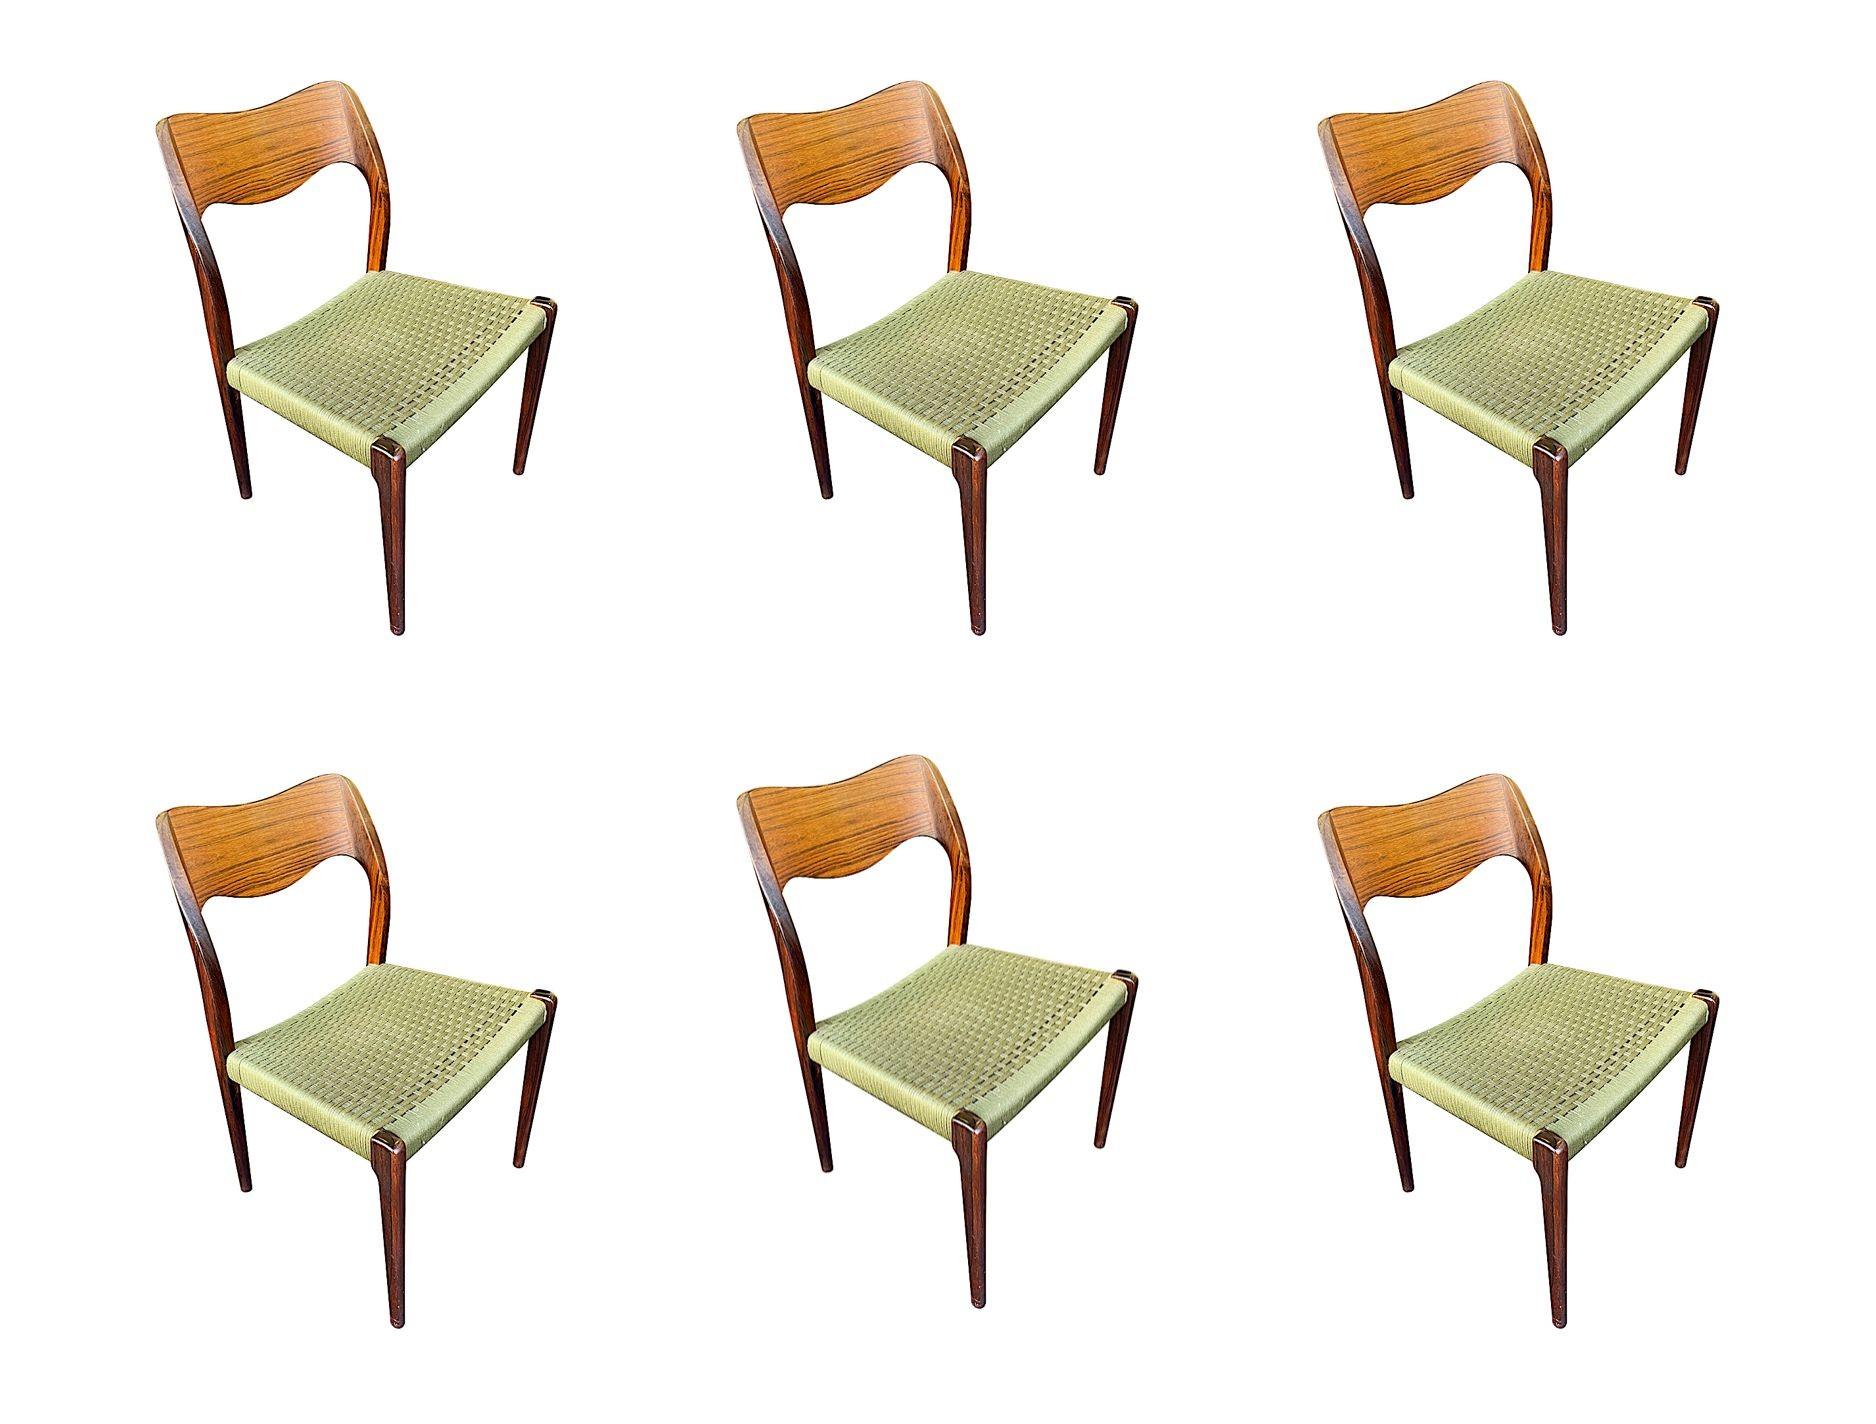 A set of 6 1950s orignal Niels Moller, Model  71 chairs designed by Neils O. Moller and made in Denmark by J L Moller, in rare rosewood with orignal green cord strung seats. All with orignal Moller and Danish manufacturing button labels underneath.